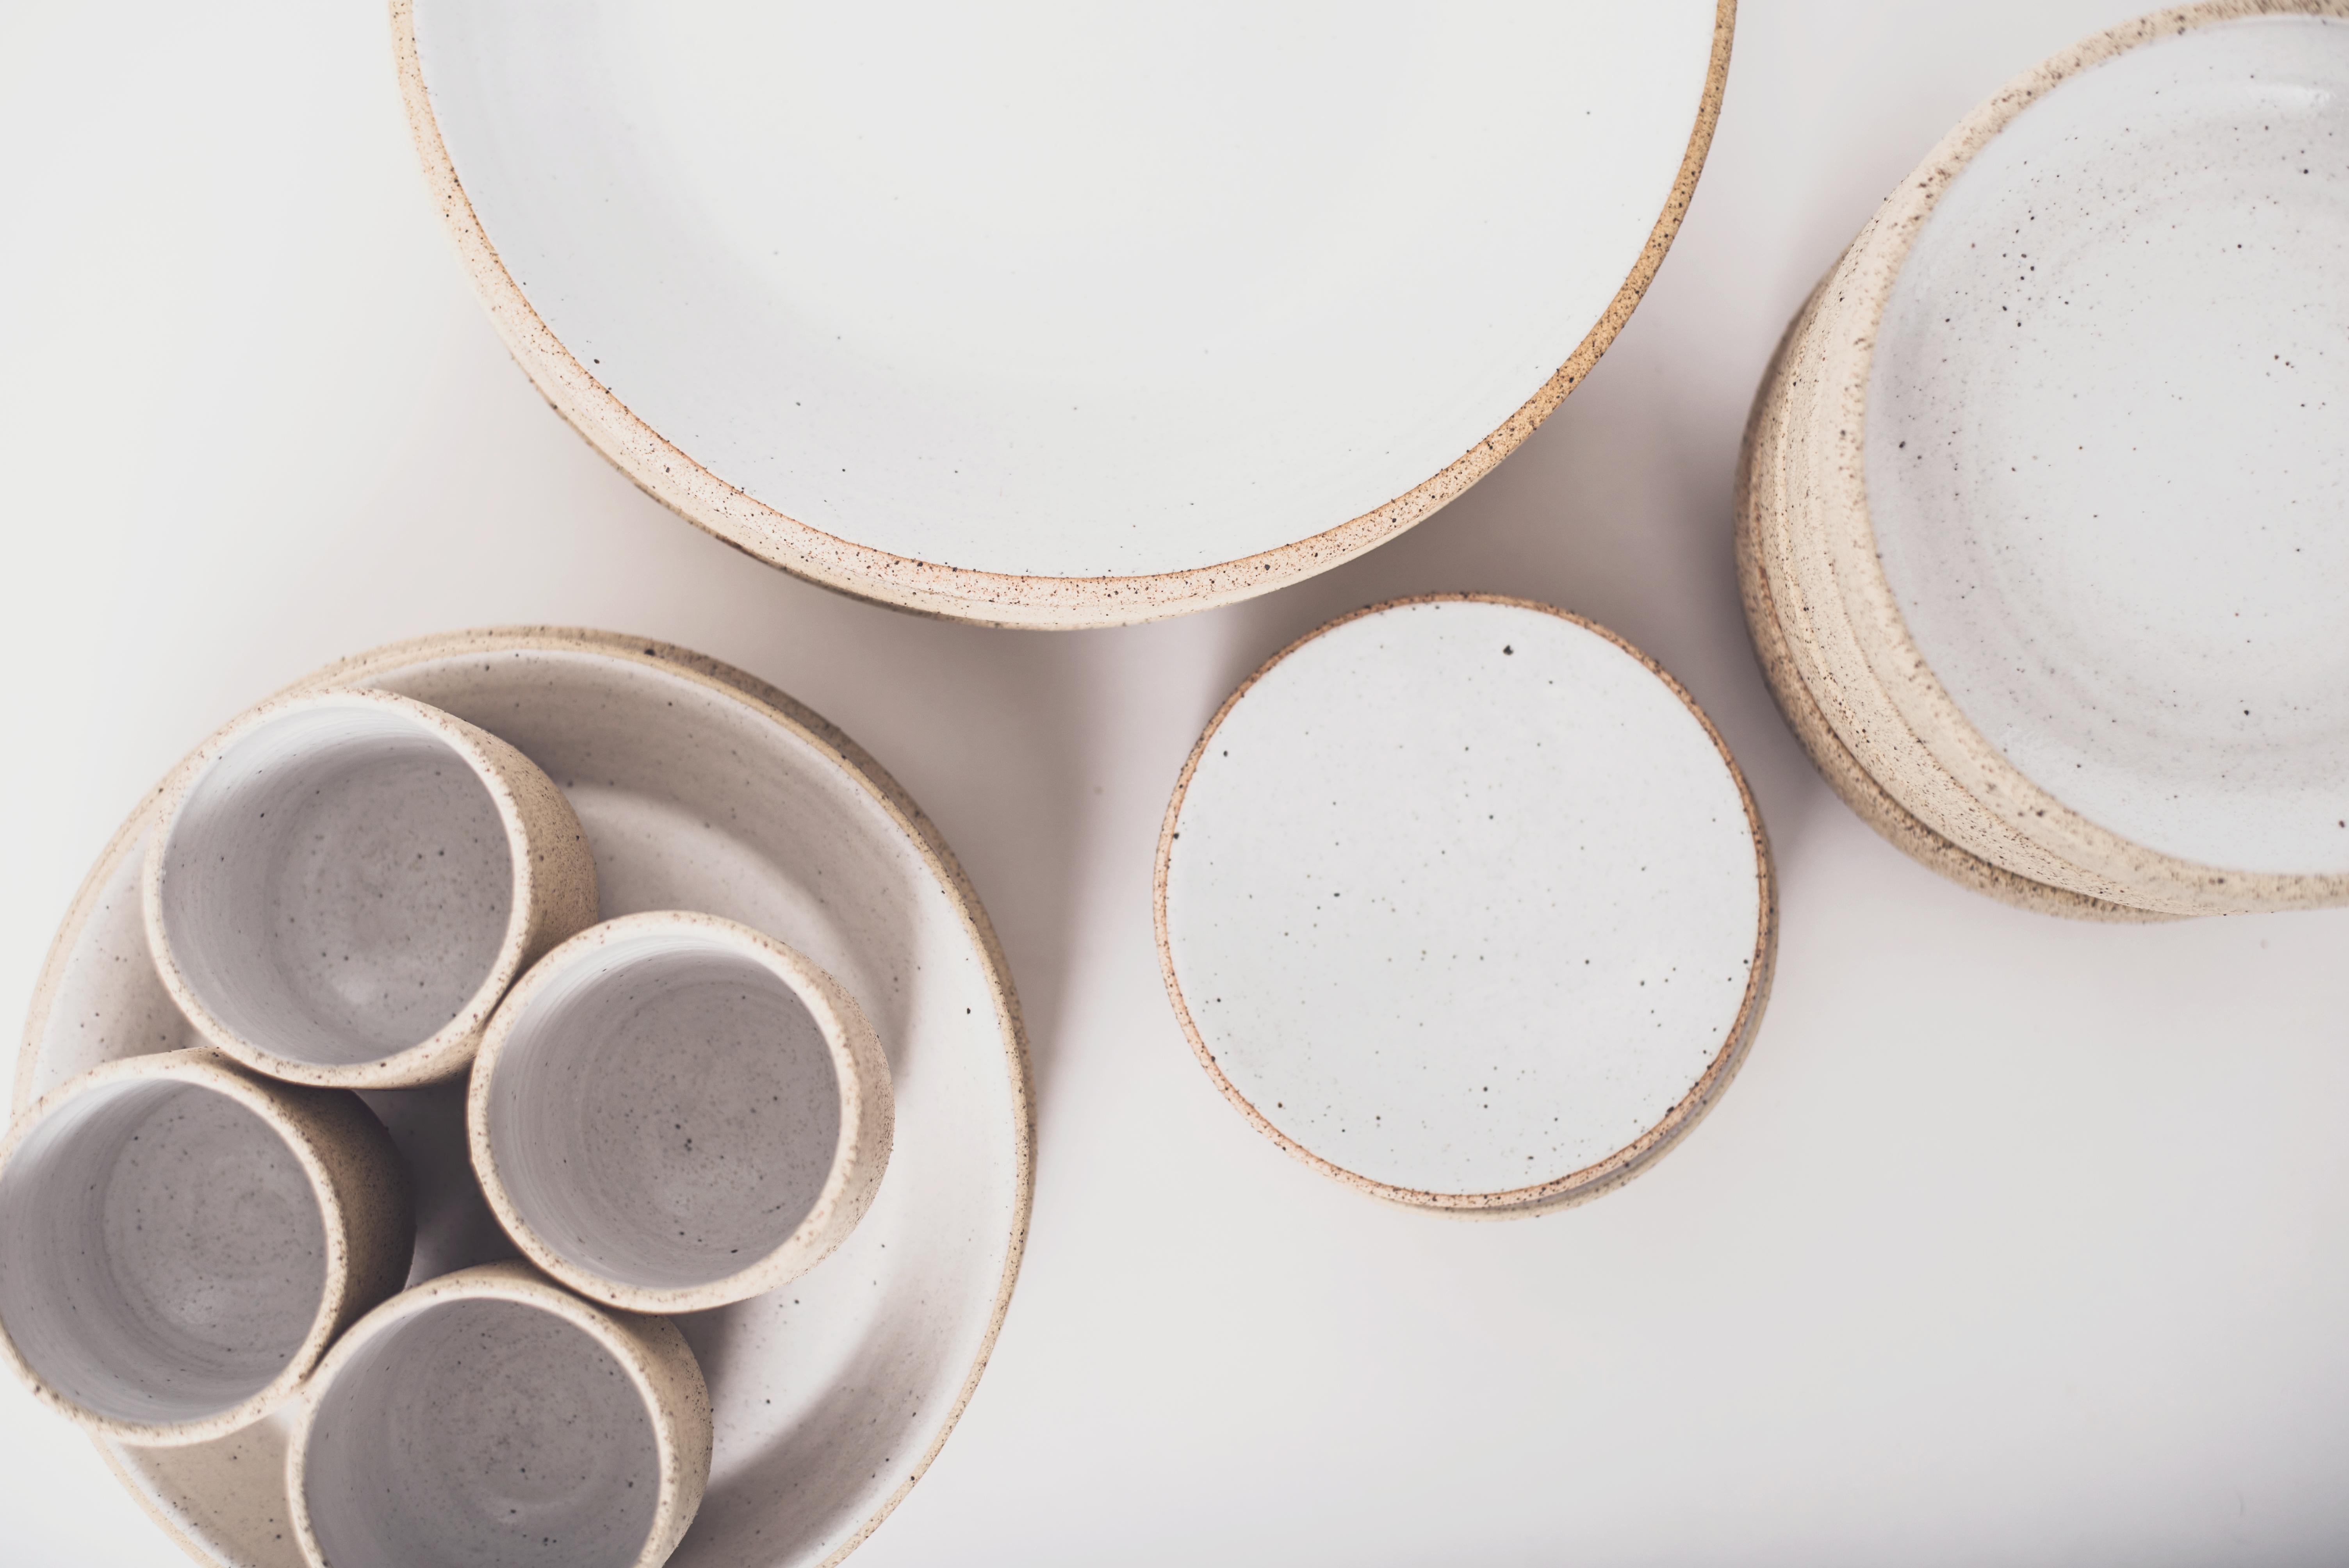 Hand-Crafted Handmade Ceramic Stoneware Saucer in Ivory, in Stock